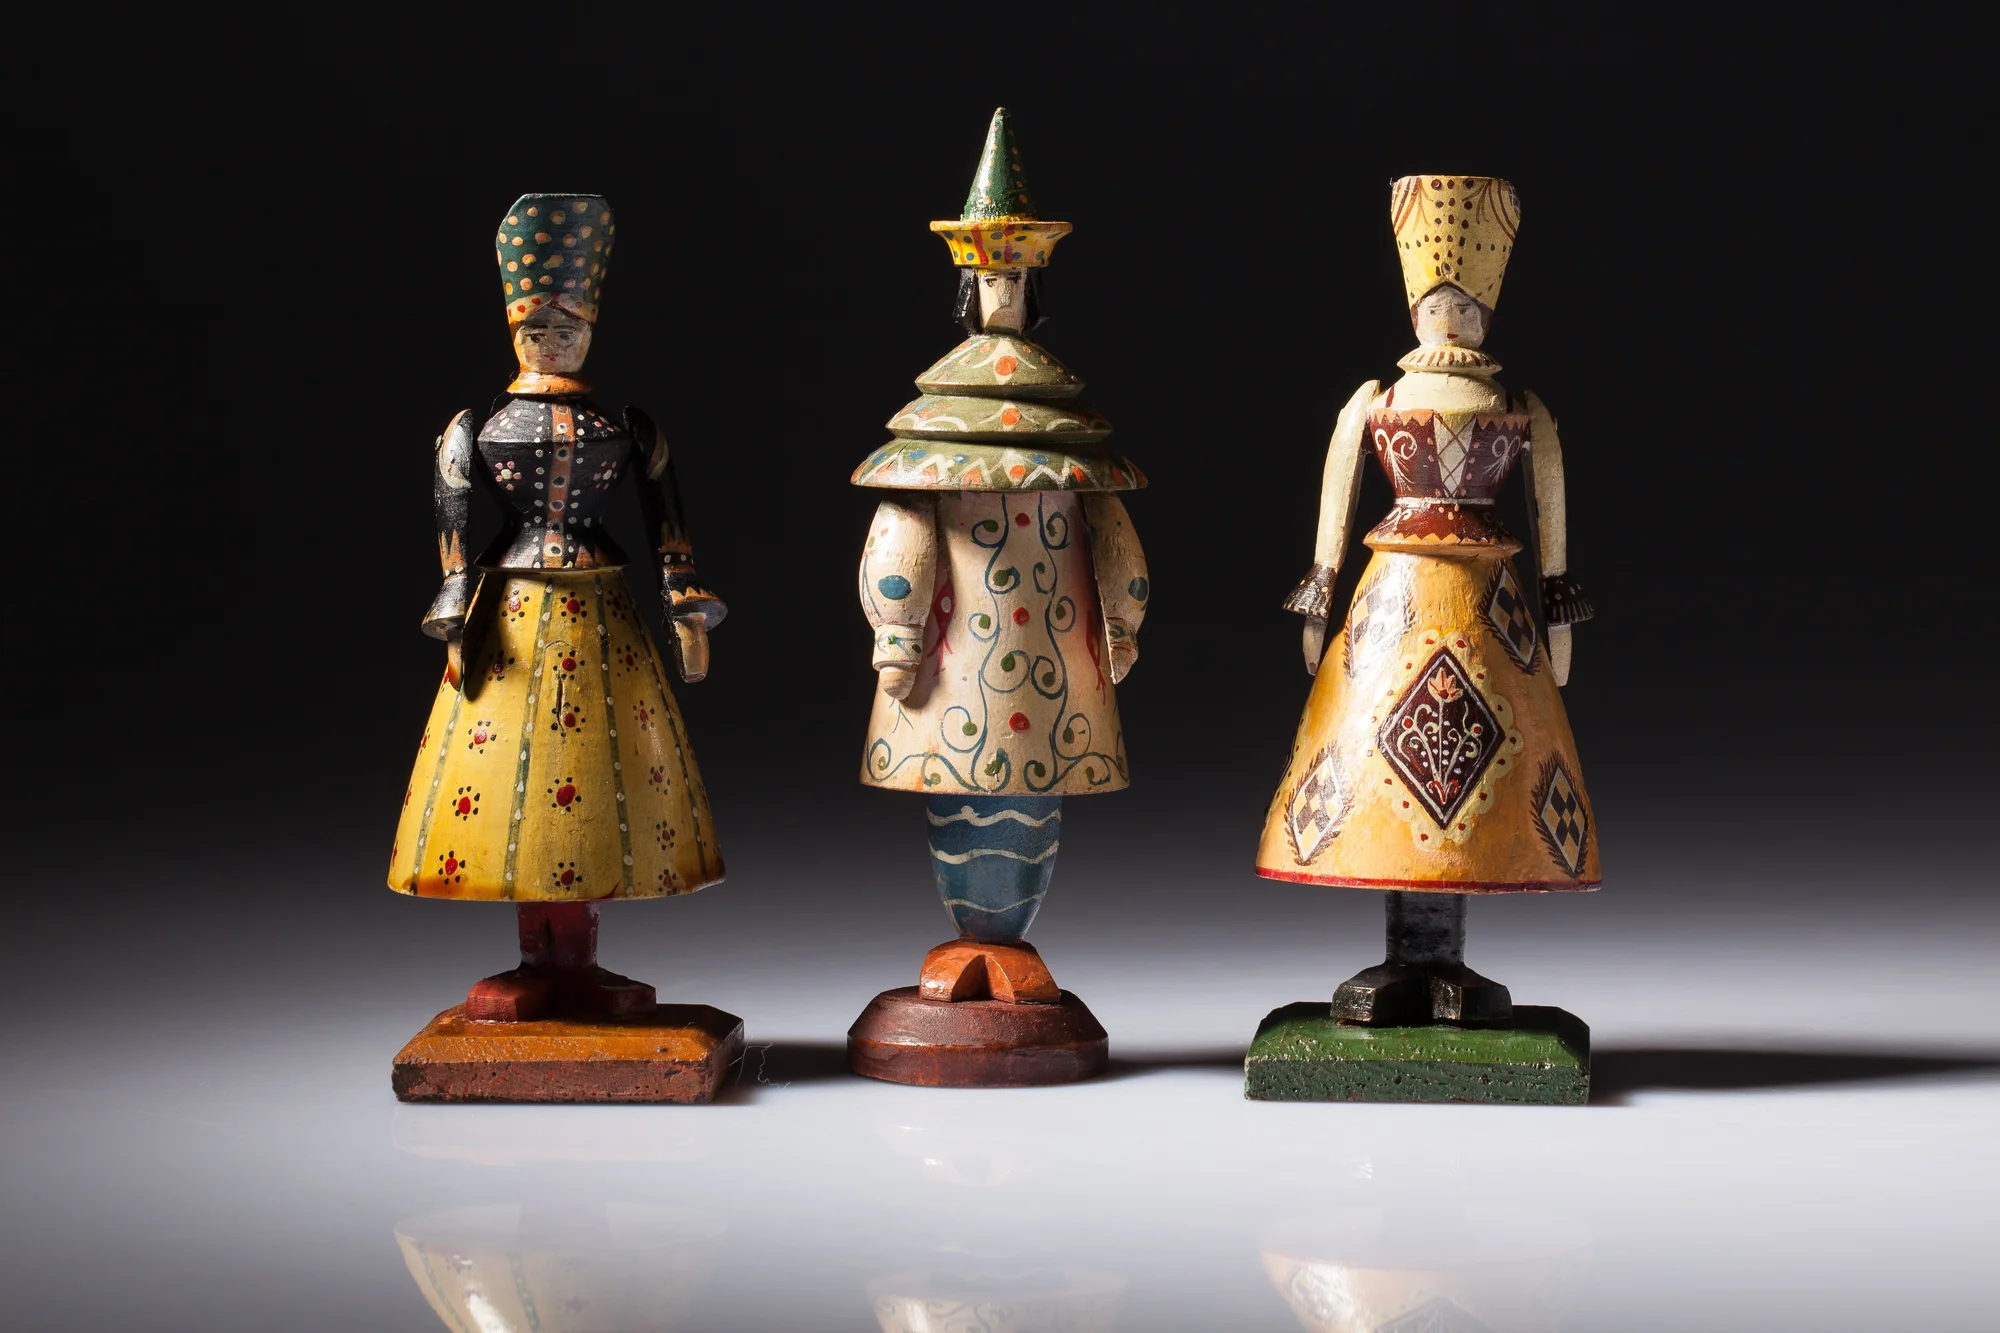 Collection of The Ethnographic Museum in Krakow - toys from Krakow Workshops, designed by one of the best-known Polish women artists of the interwar period, art deco representative - Zofia Stryjeńska.